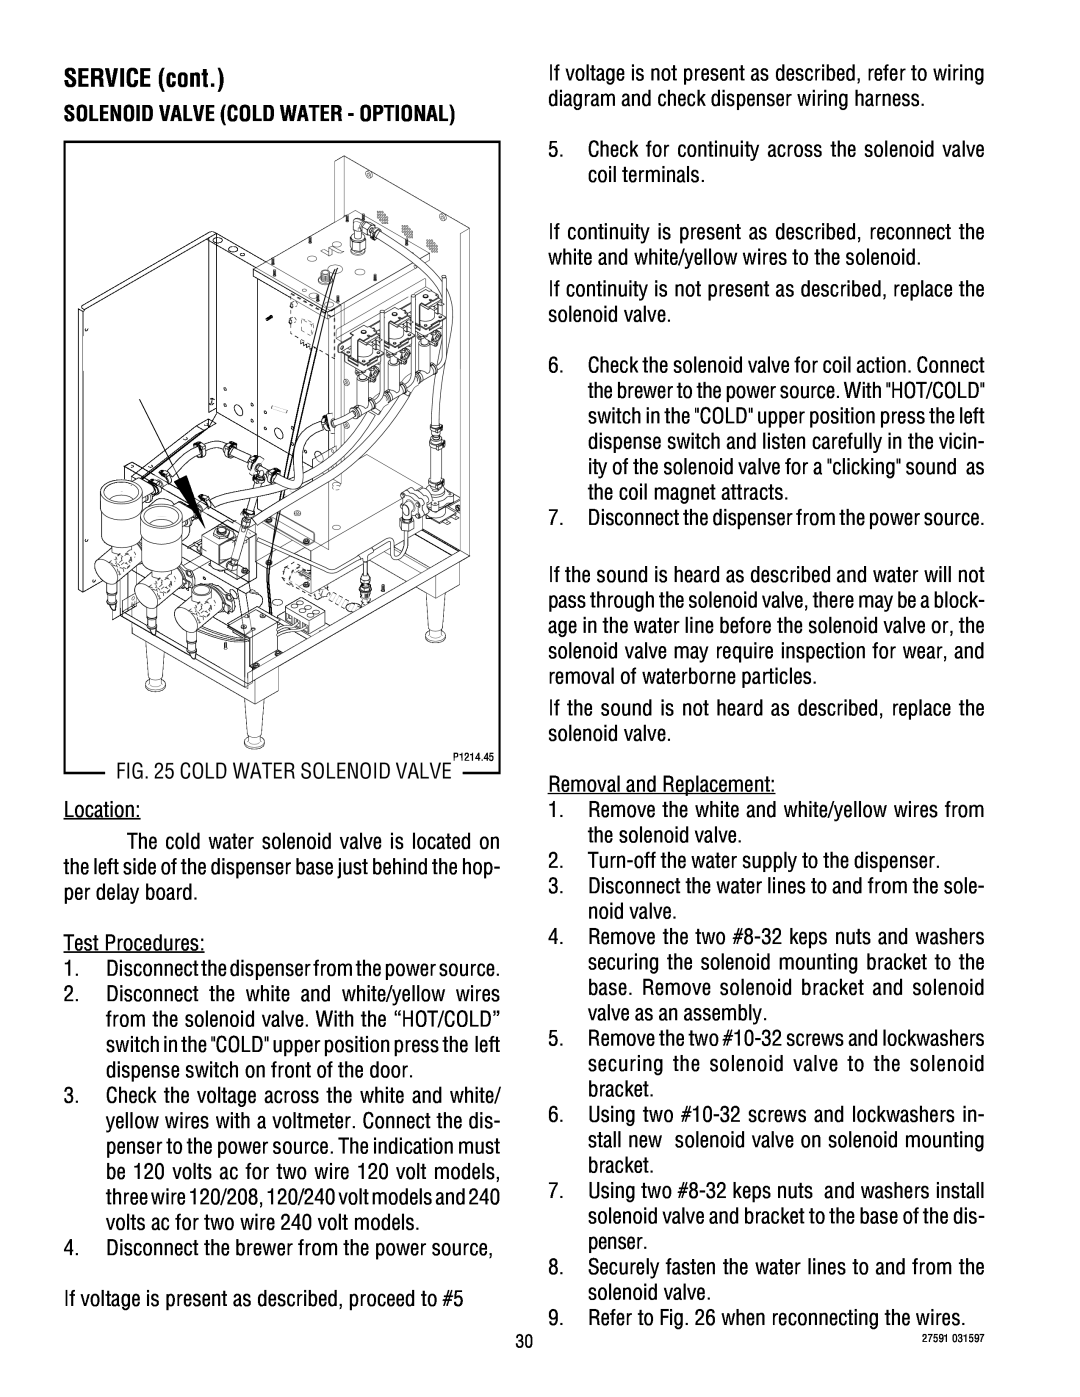 Bunn HC-3 service manual Solenoid Valve Cold Water - Optional, SERVICE cont 